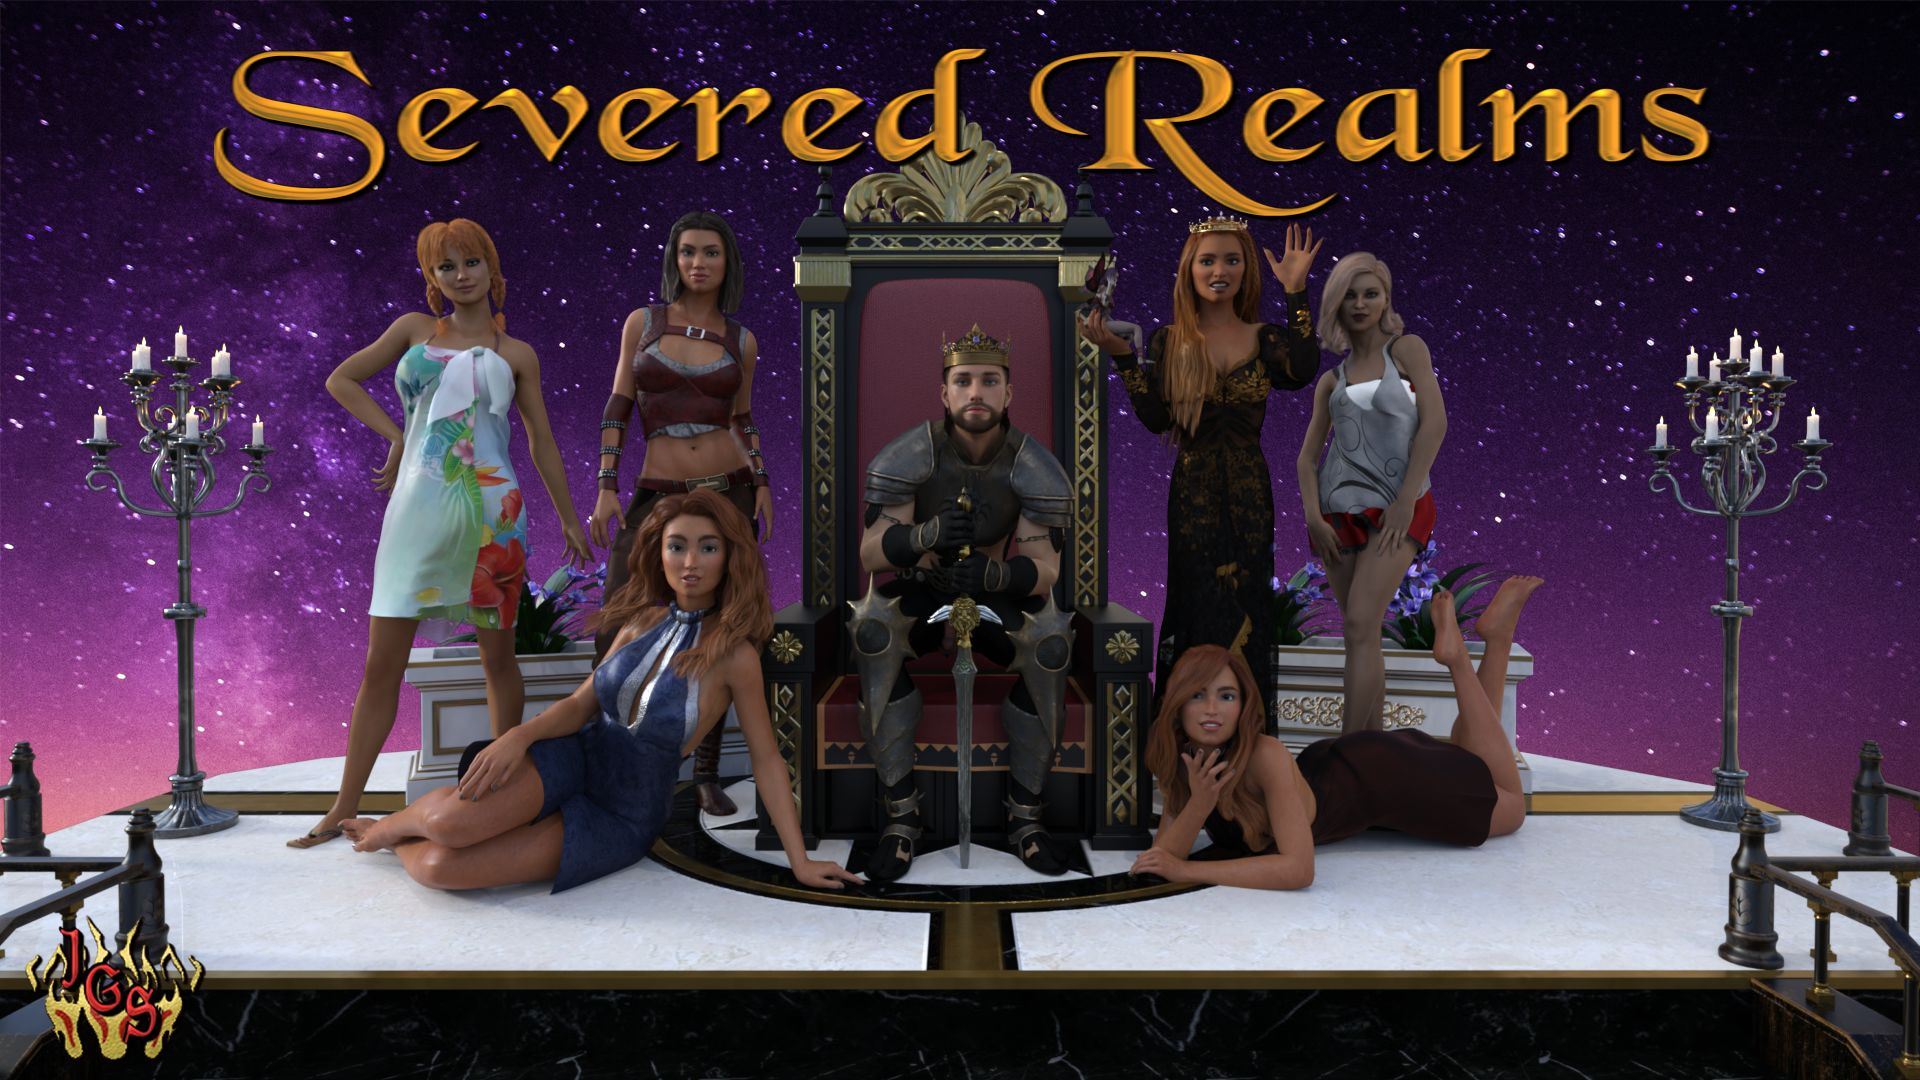 Severed Realms Ren'Py Porn Sex Game v.0.0.7 Download for Windows, MacOS,  Linux, Android